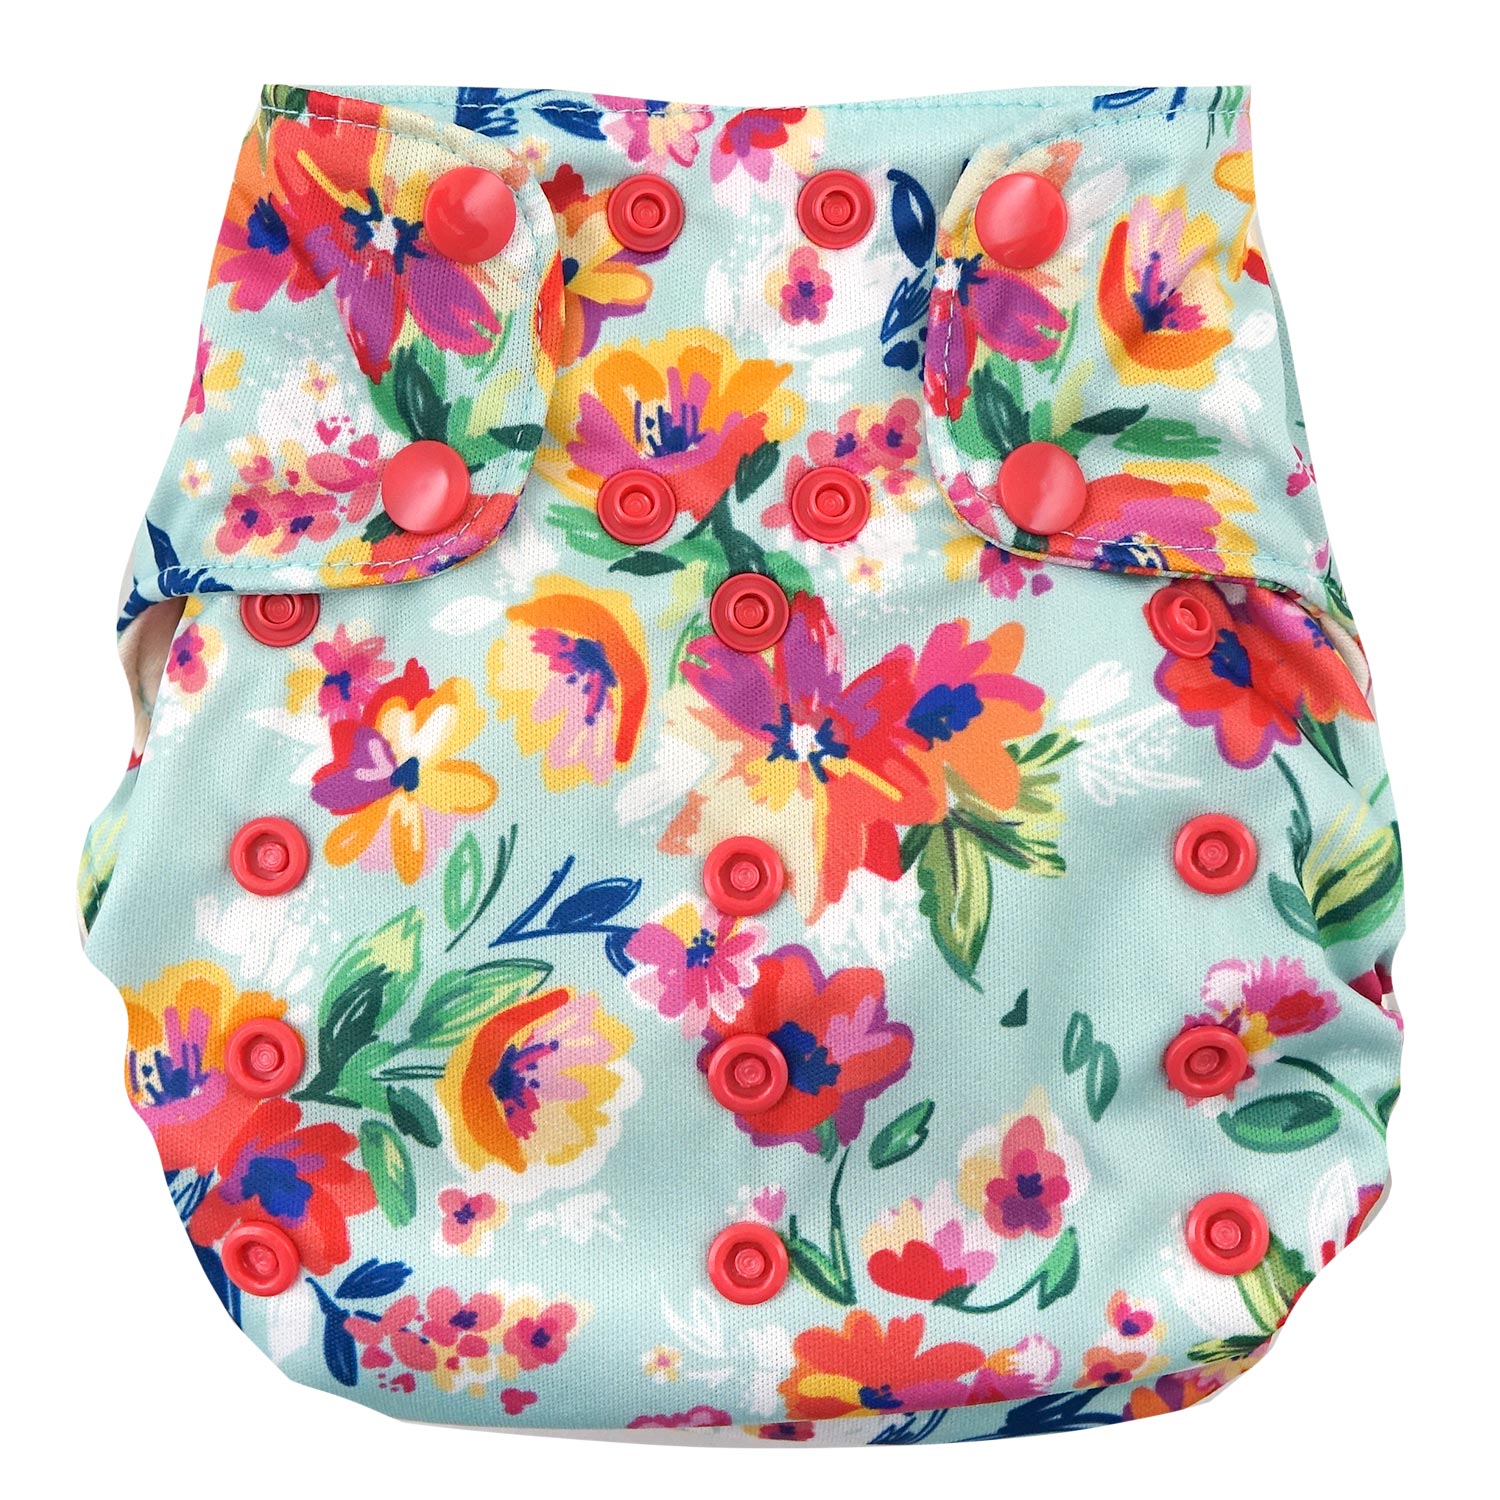 Smart Bottoms 3.1 One Size All-in-One nappy Pattern: Aqua Floral